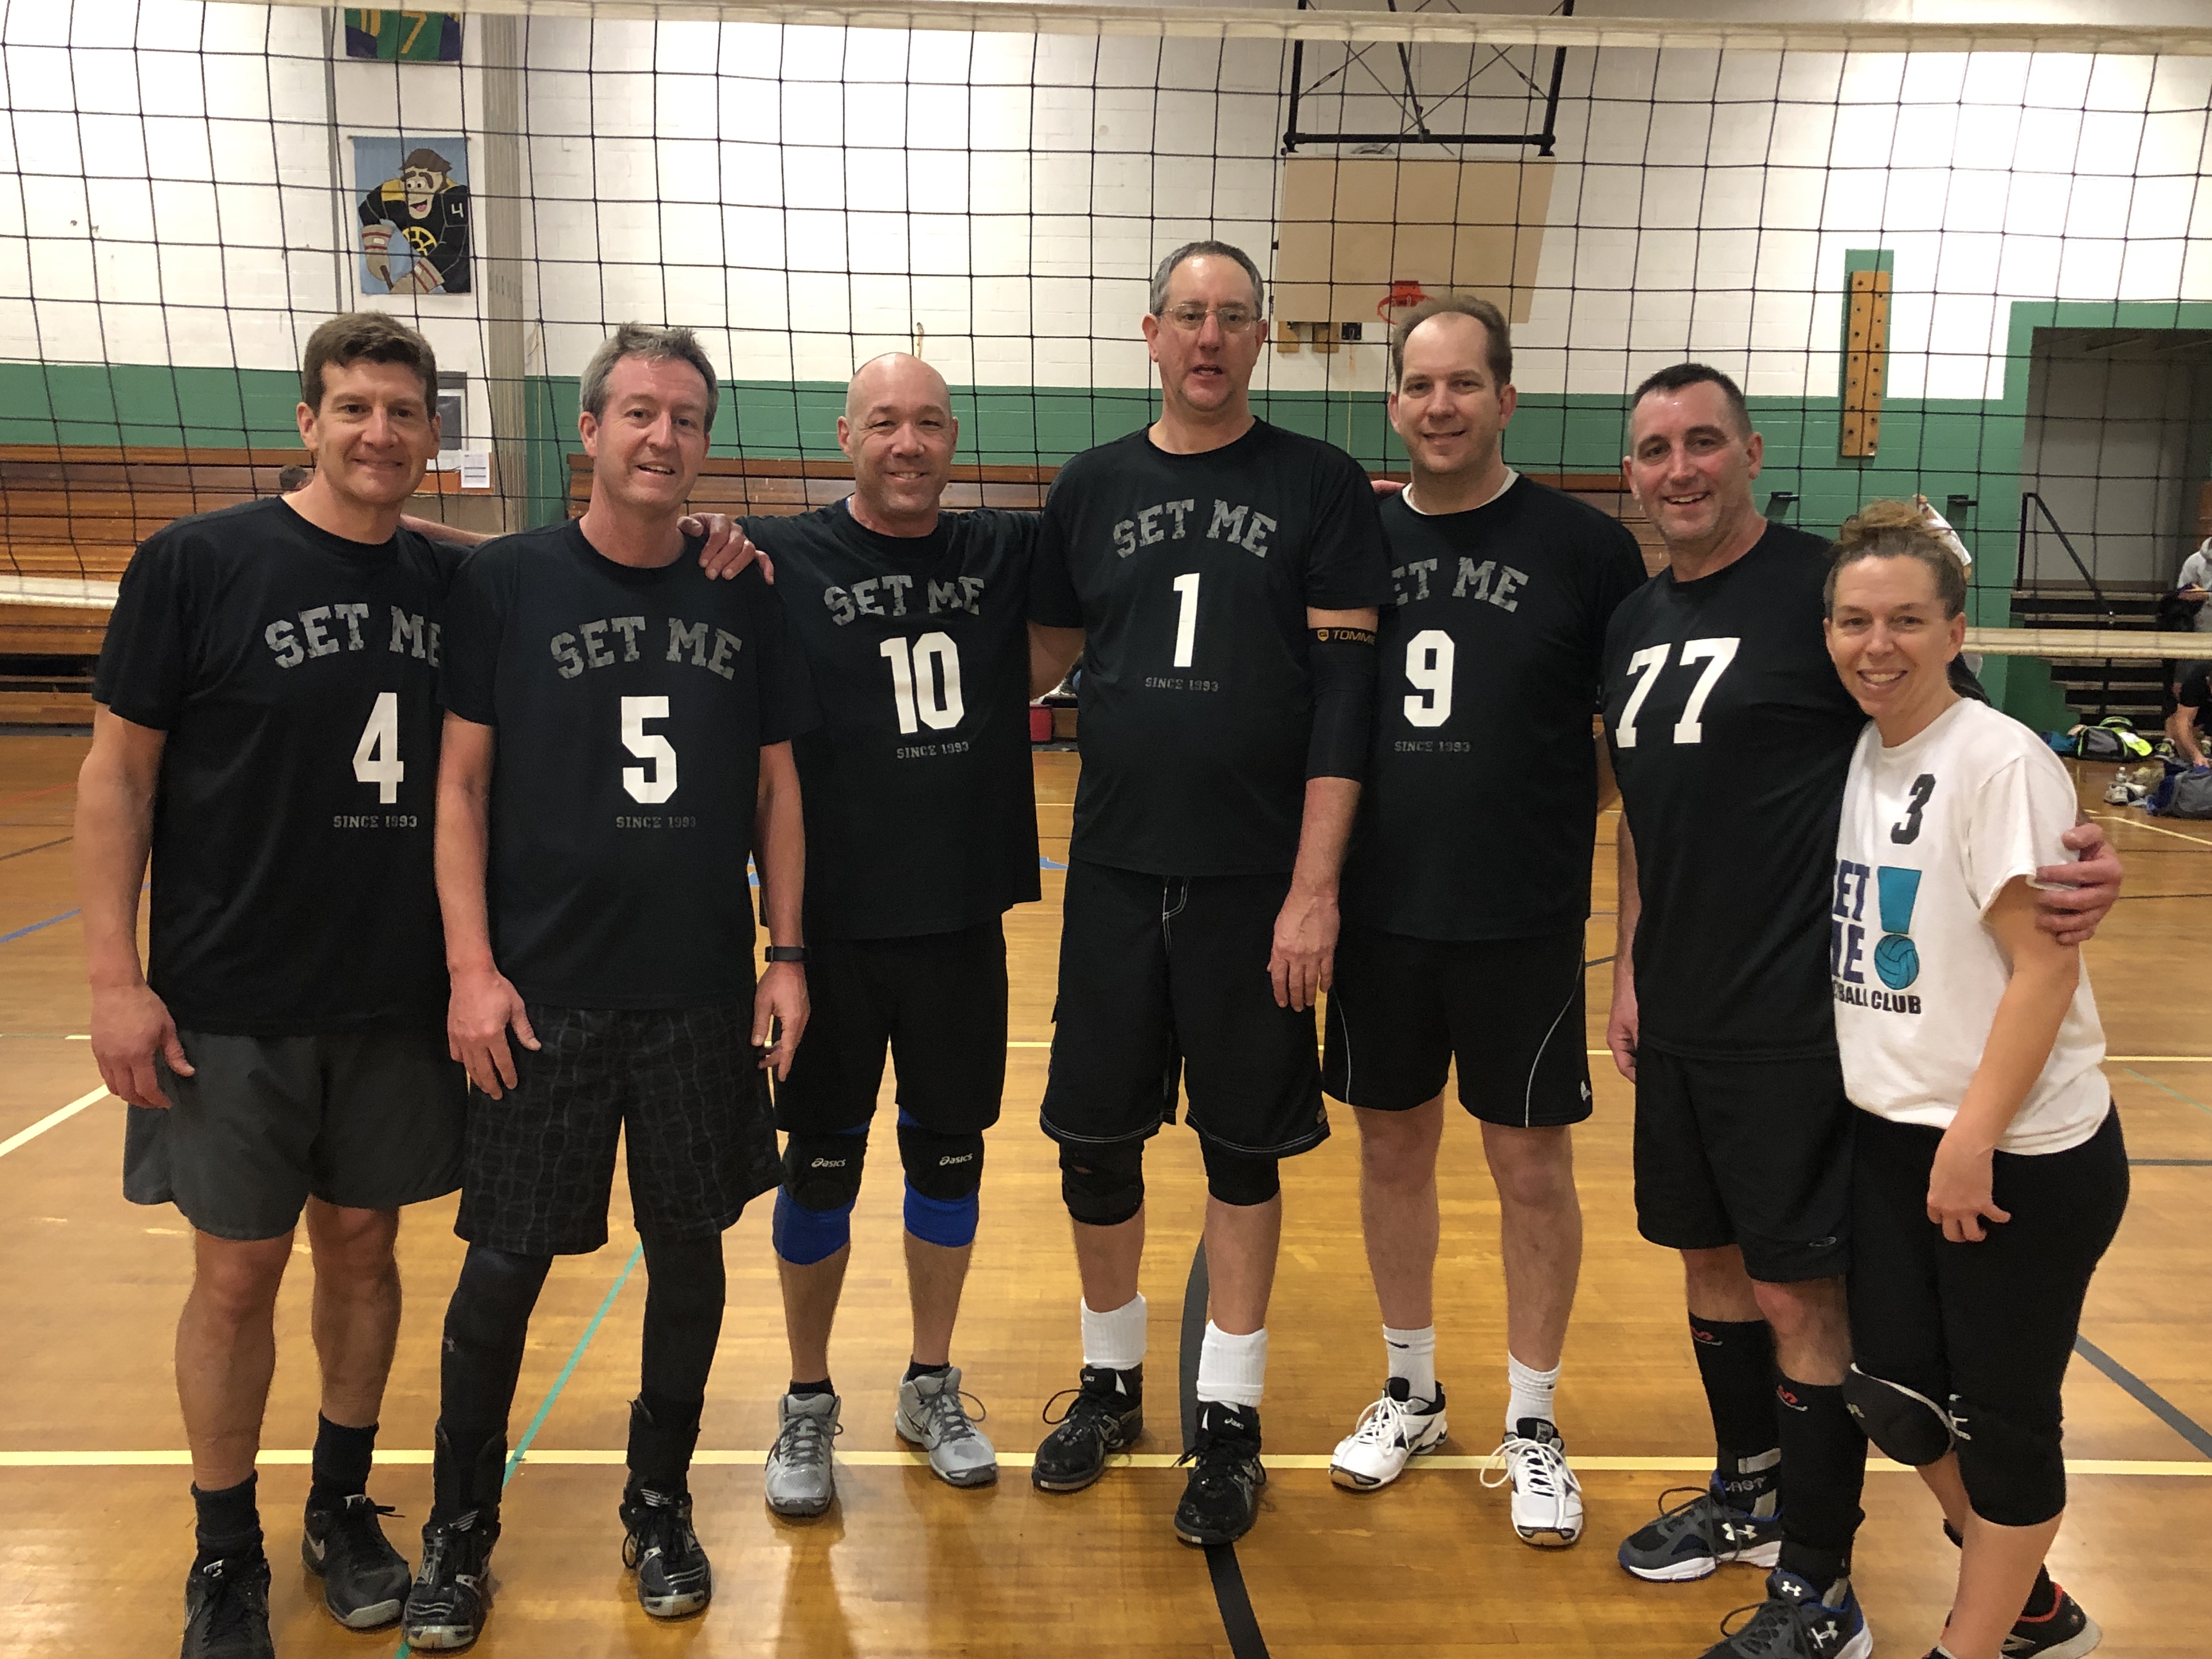 Set Me 50’s Take down Canton in an EPIC one game final in the Men’s B- 50’s+ in Clinton